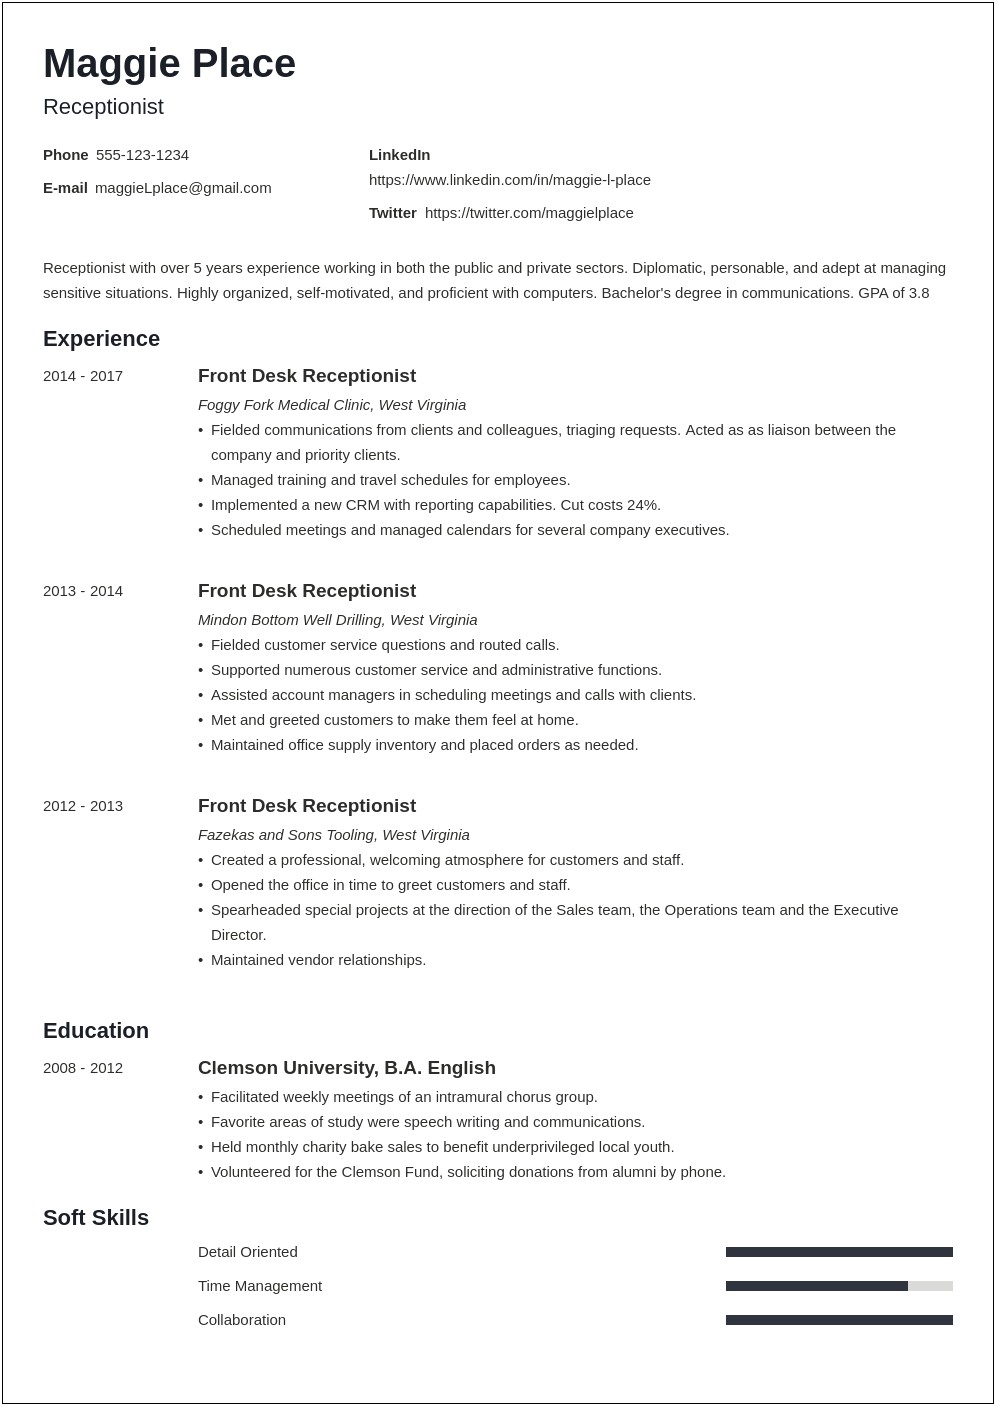 Resume Samples For Receptionist With No Experience